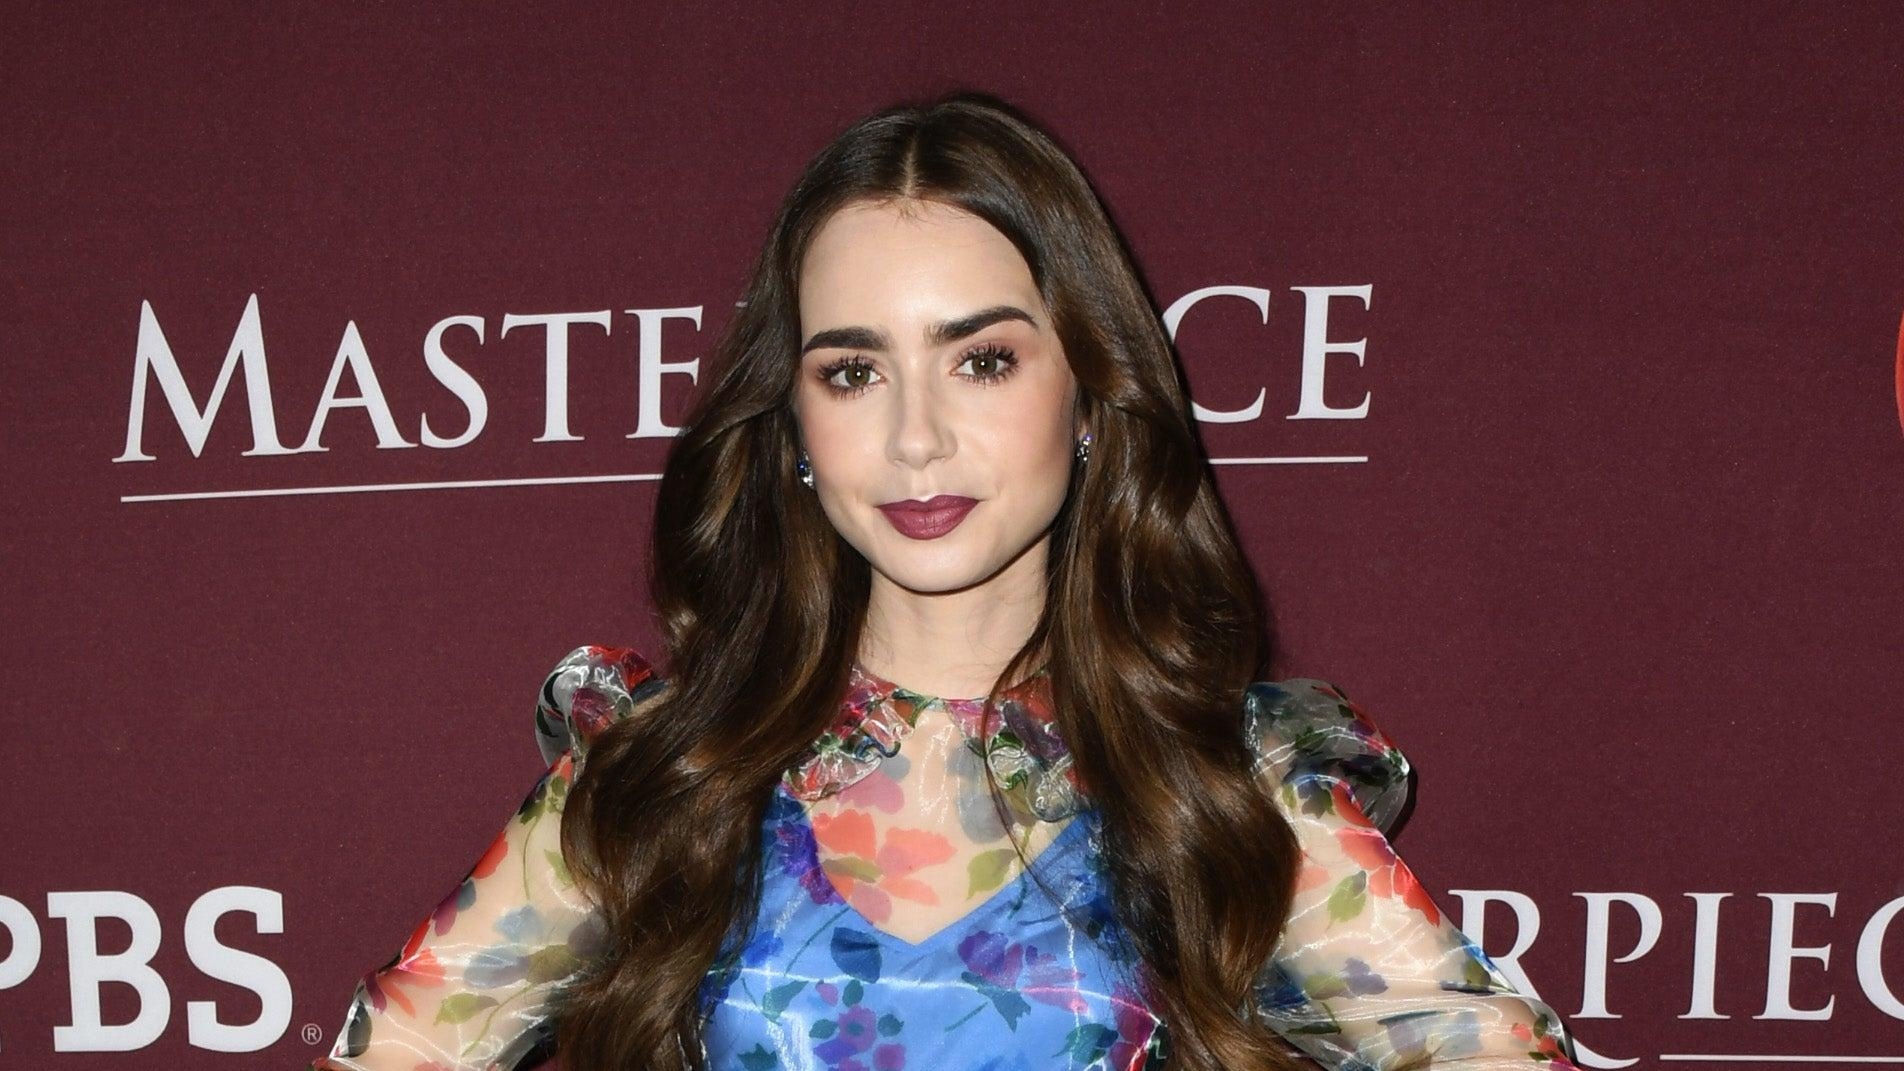 Lena Dunham to direct Polly Pocket movie starring Lily Collins